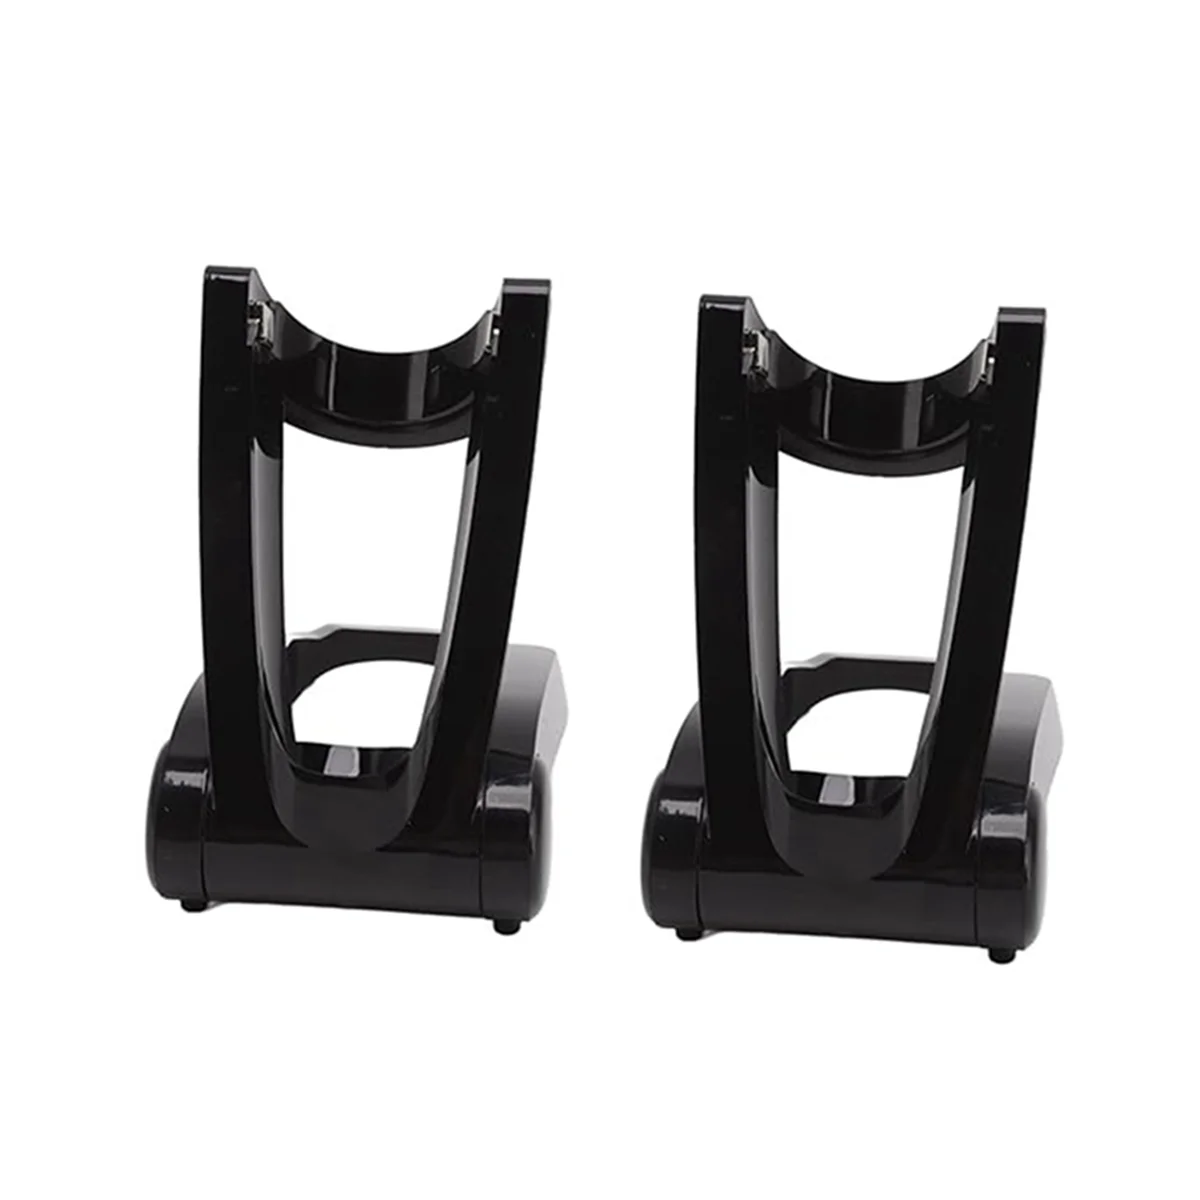 

Suitable for Shaver RQ12 Charger Base RQ1251/1250/1280/1260 Accessories Shaver Foldable Stand 2 Pack